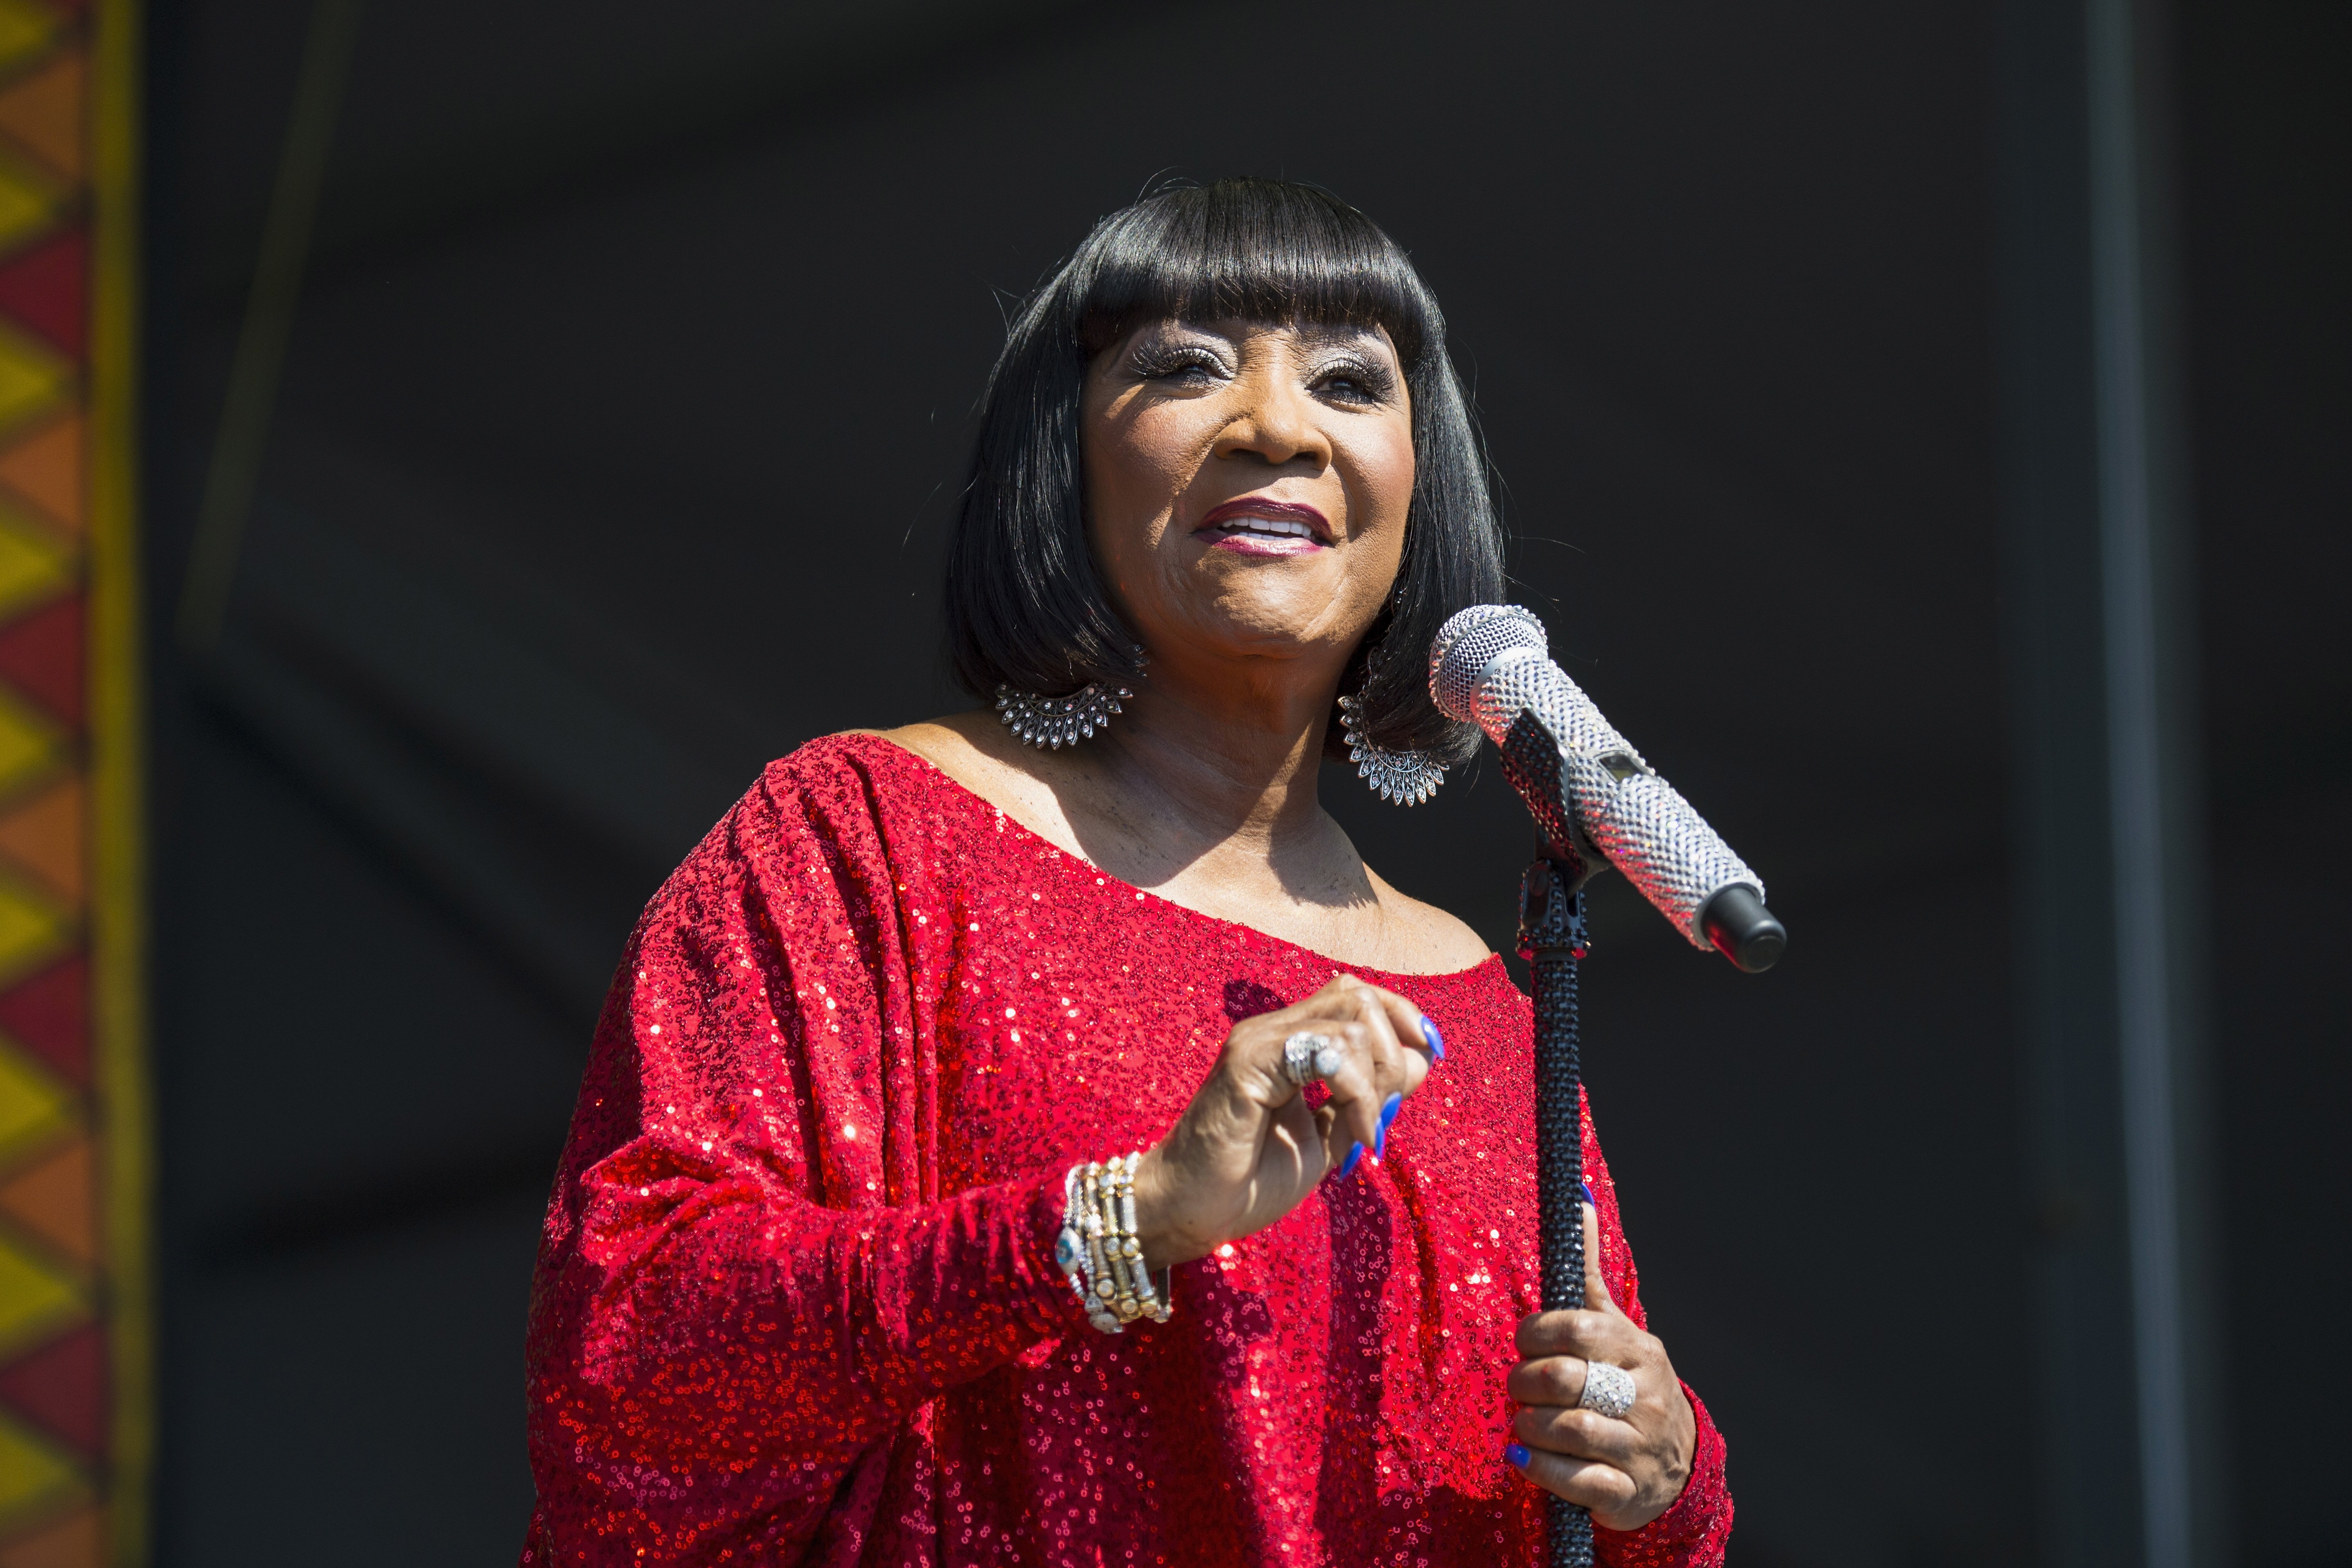 Patti LaBelle at the 2017 New Orleans Jazz & Heritage Festival on May 7, 2017 | Photo: Getty Images